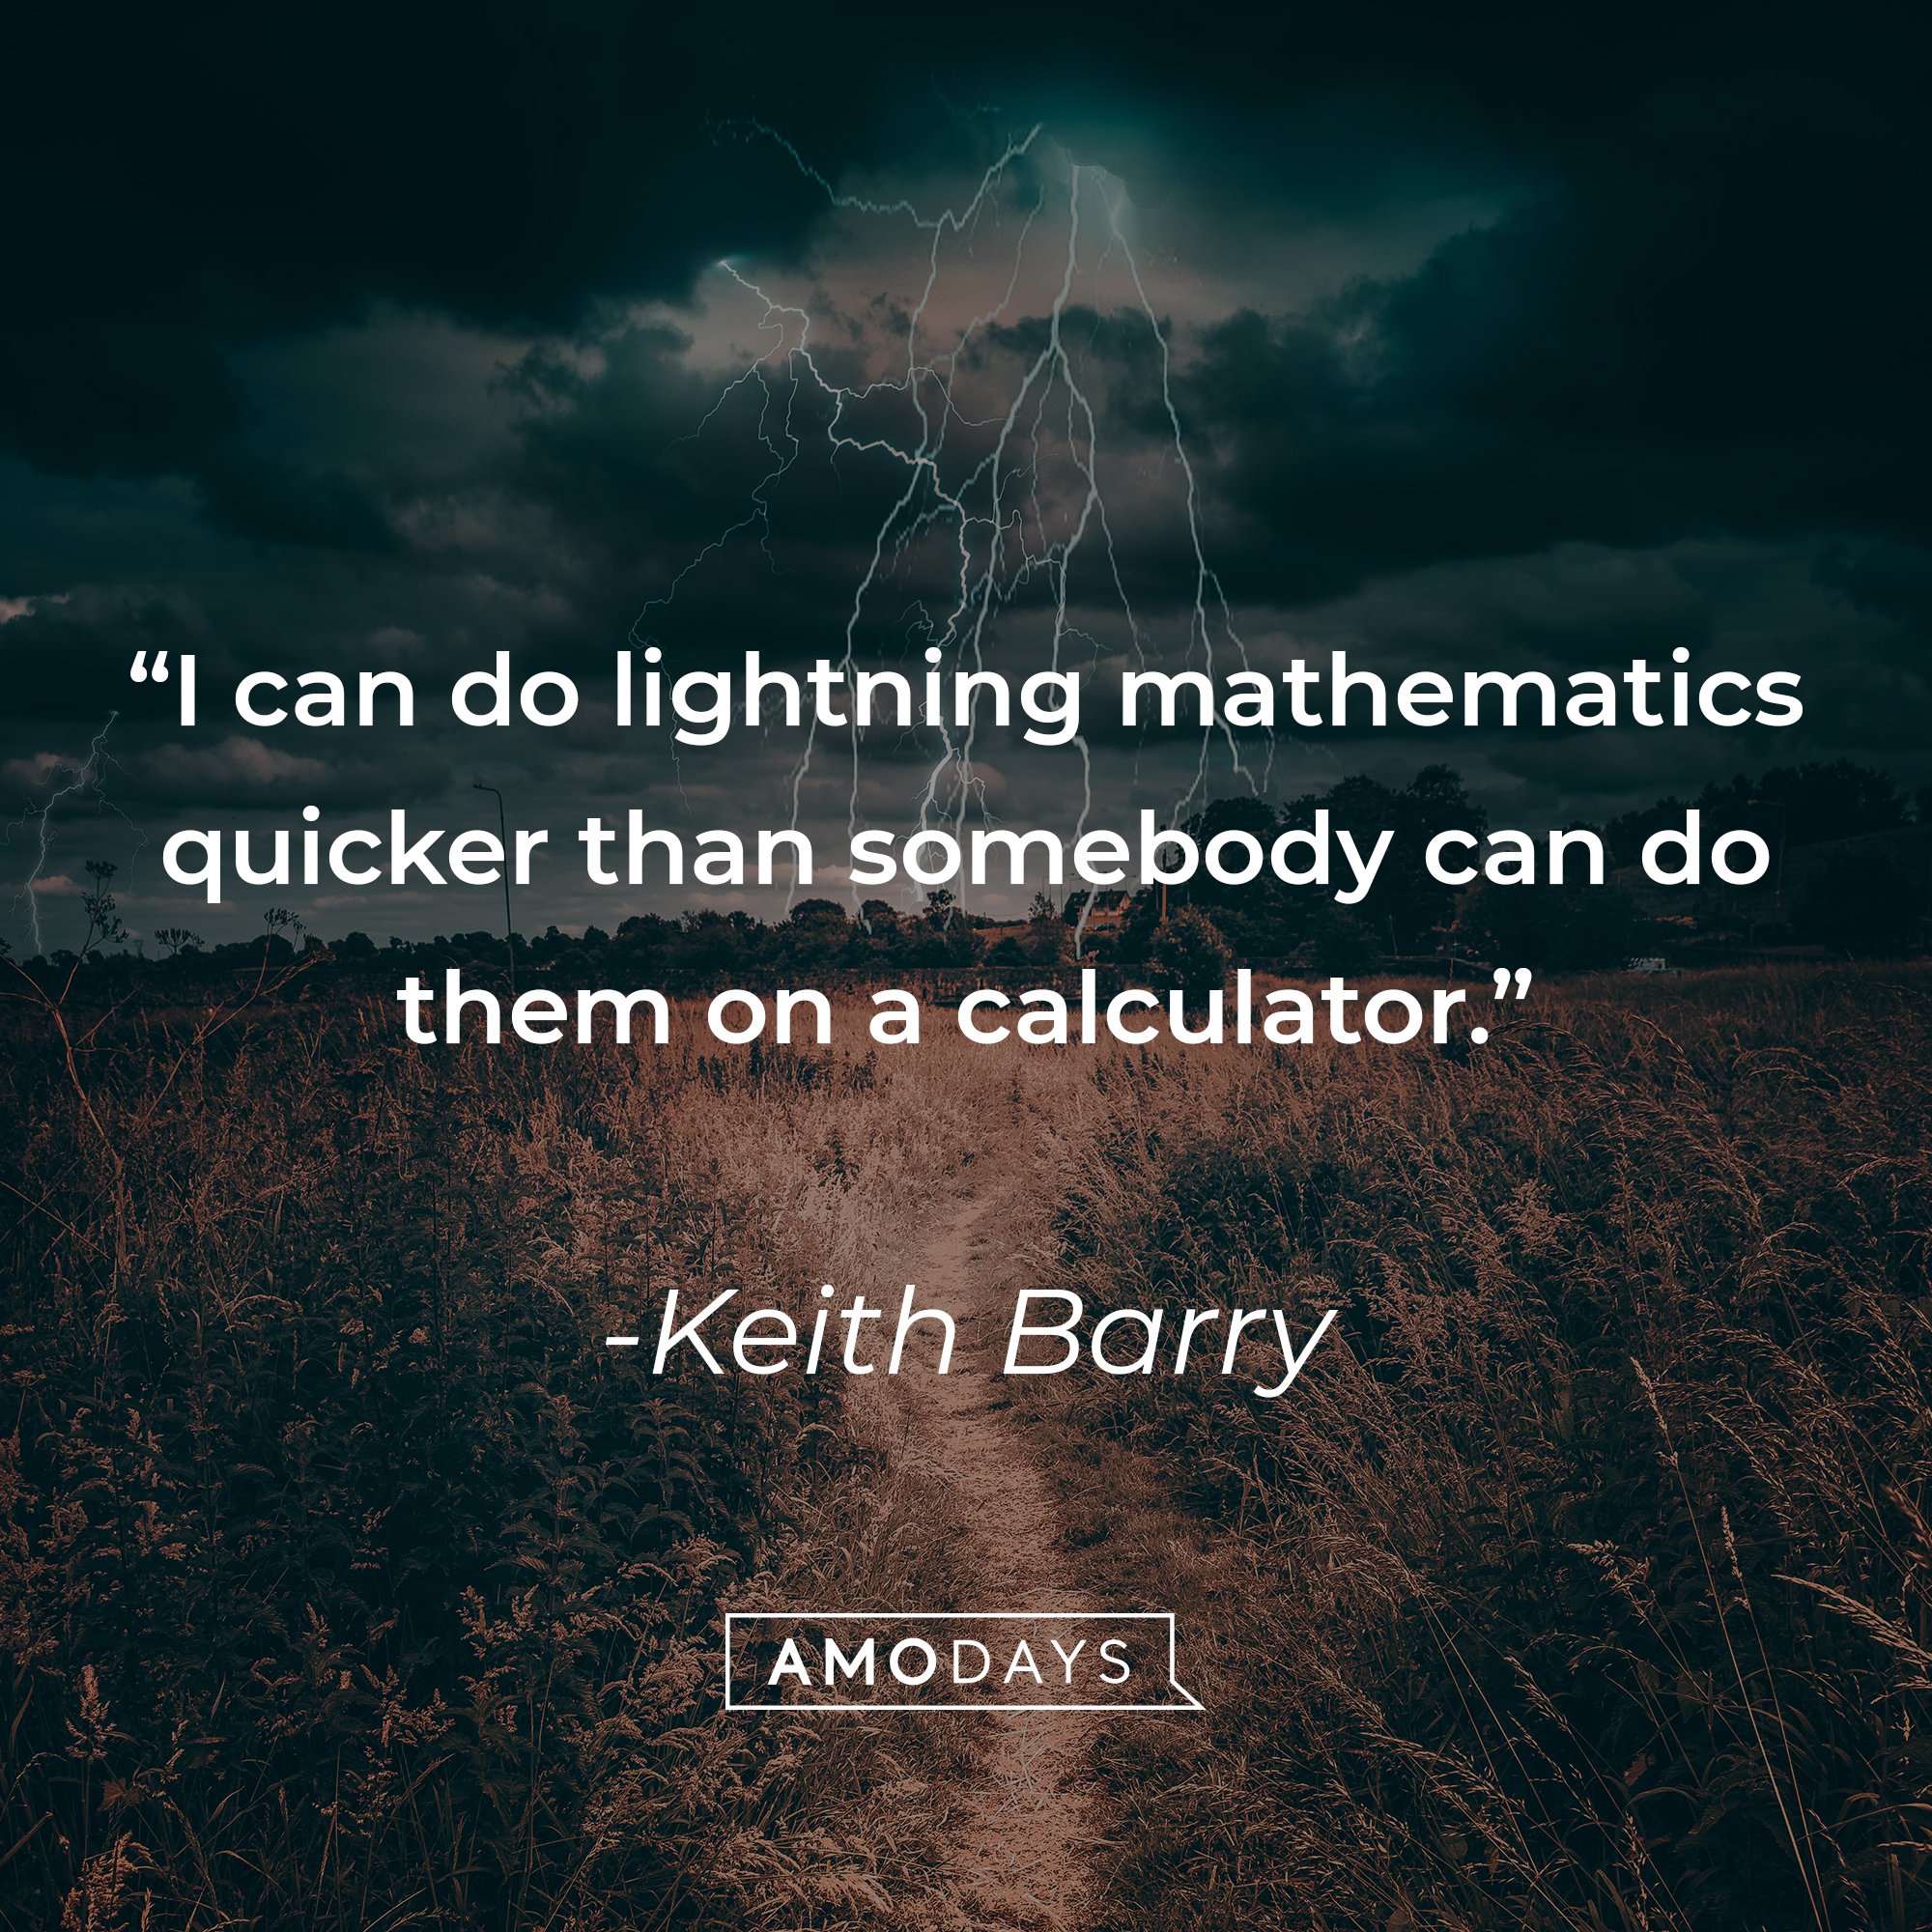 Keith Barry’s quote: "I can do lightning mathematics quicker than somebody can do them on a calculator." | Image: AmoDays  